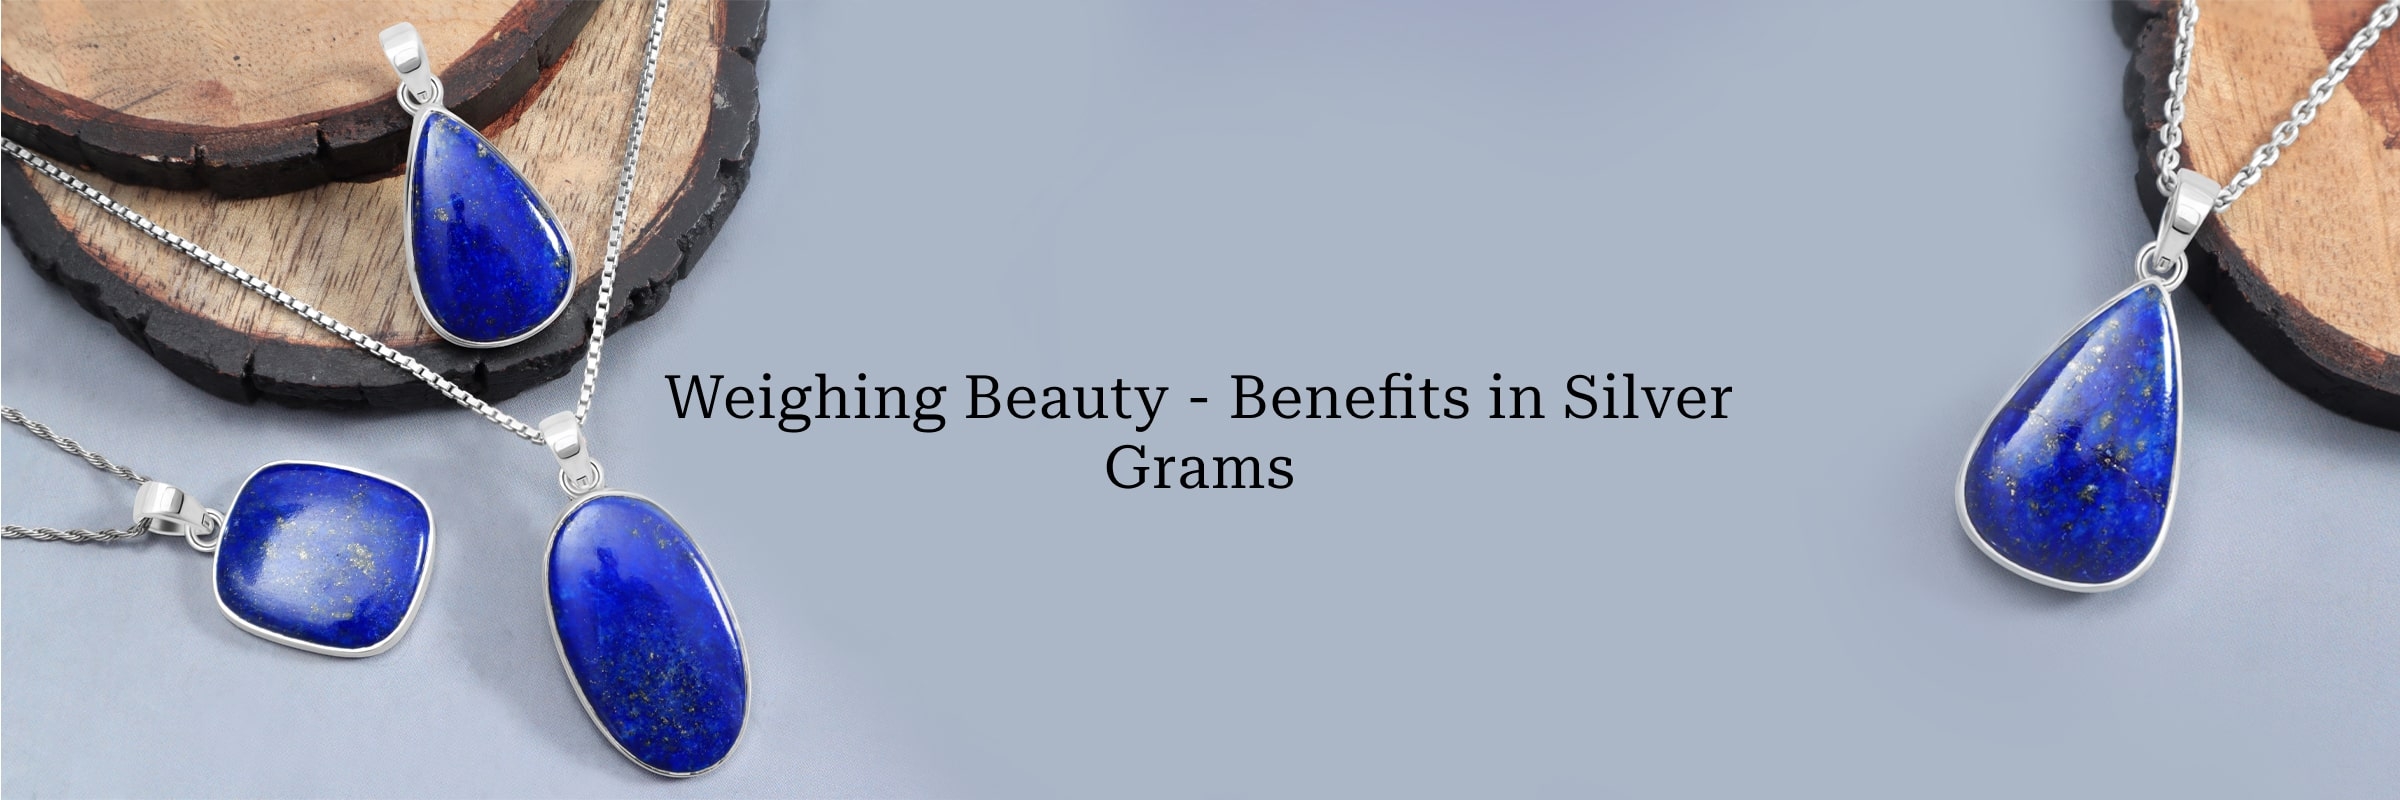 Benefits of buying Silver Jewelry in grams